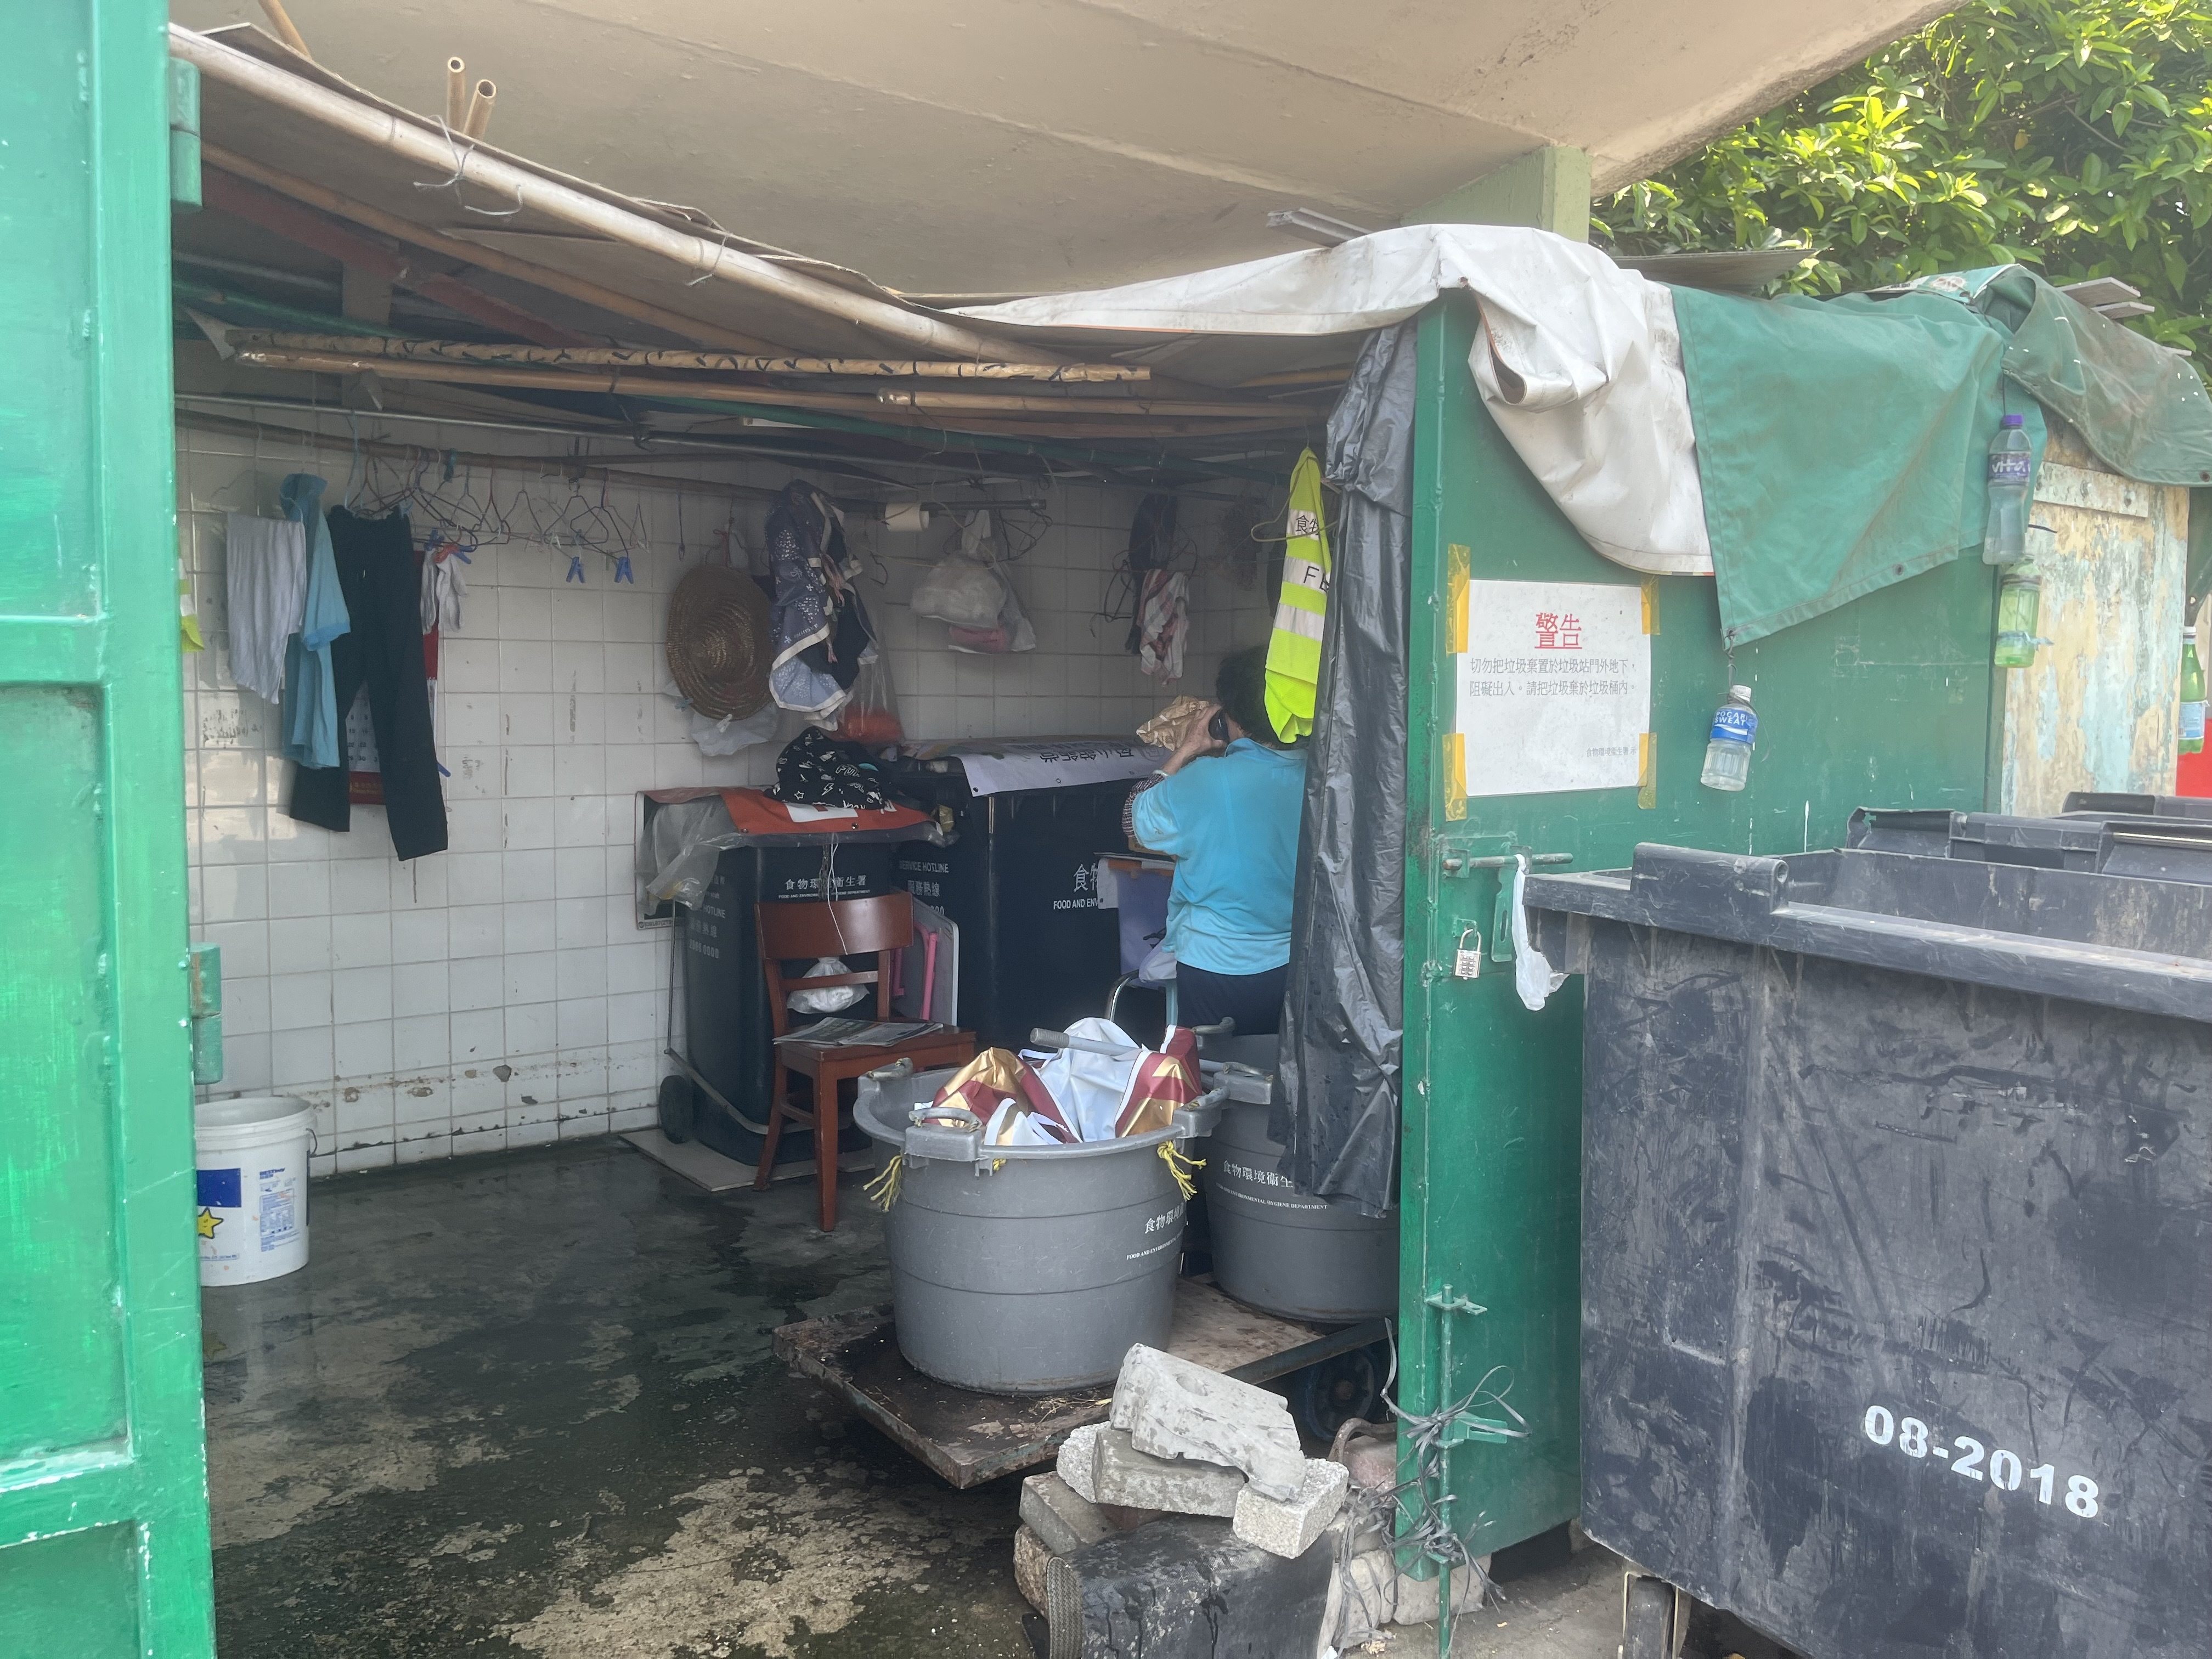 In rural parts of Yuen Long, an outsourced cleaner’s designated rest area is just a small trash station without windows or electricity, covered by a makeshift structure. Photo: Kelly Fung